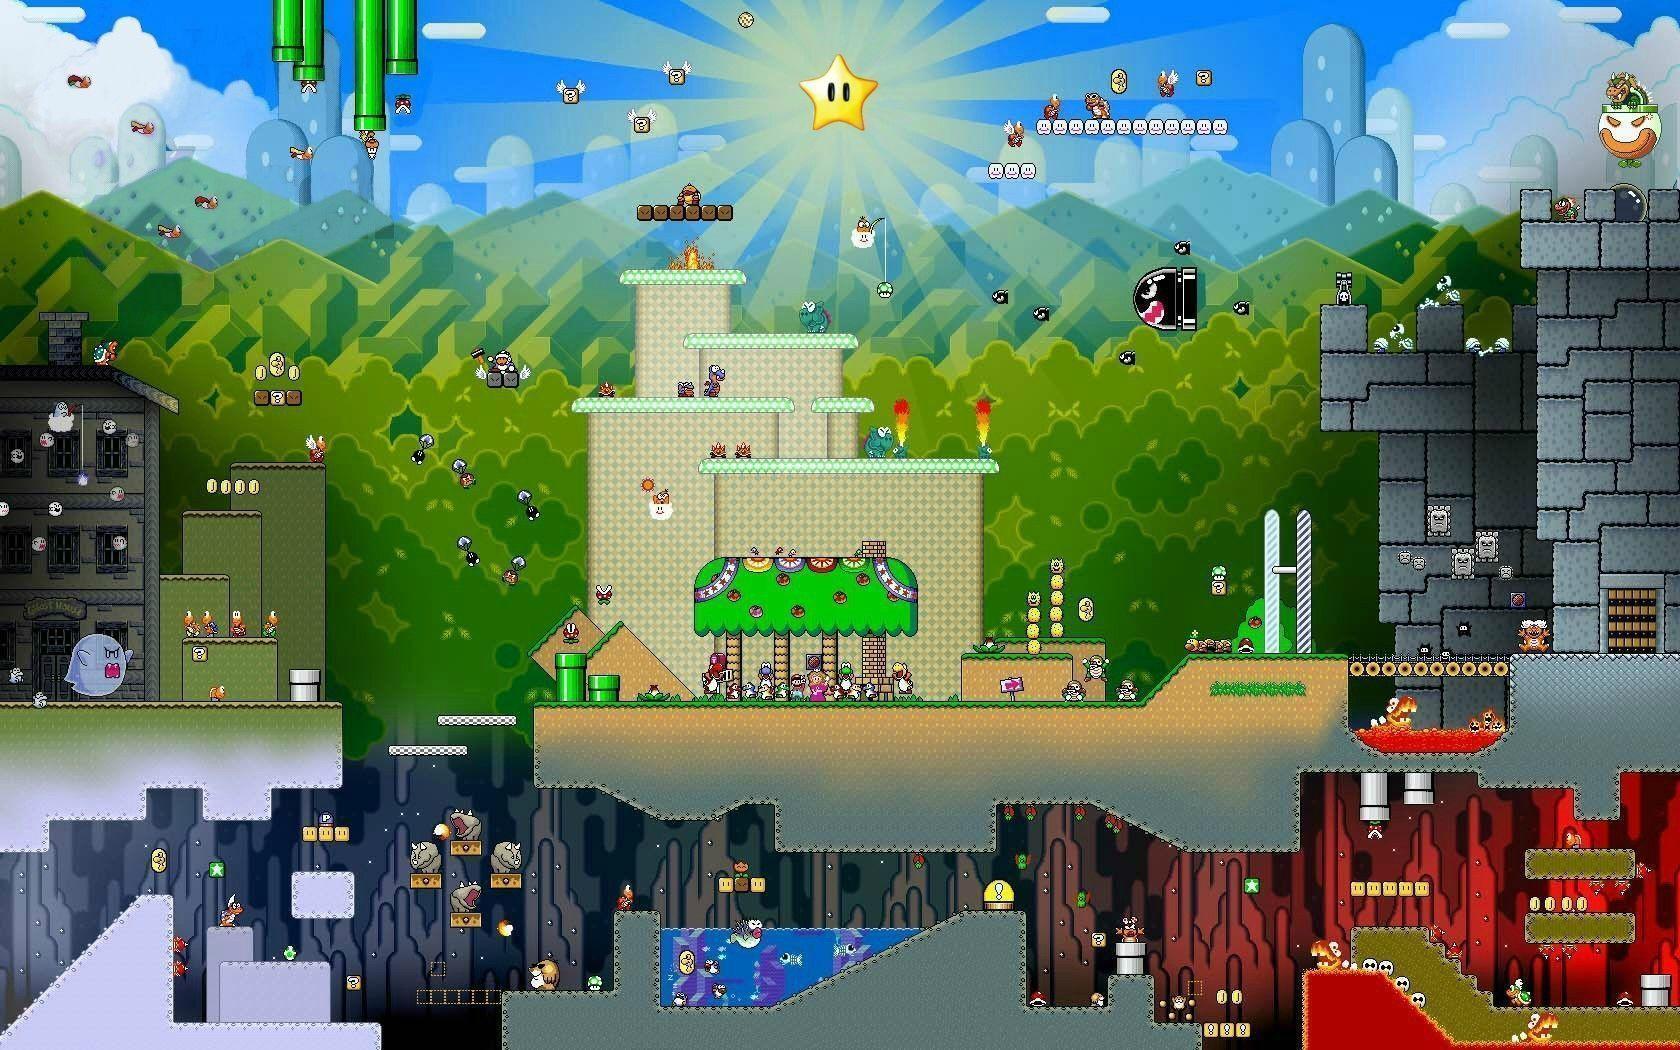 Awesome Super Mario Wallpaper. The Digital Record